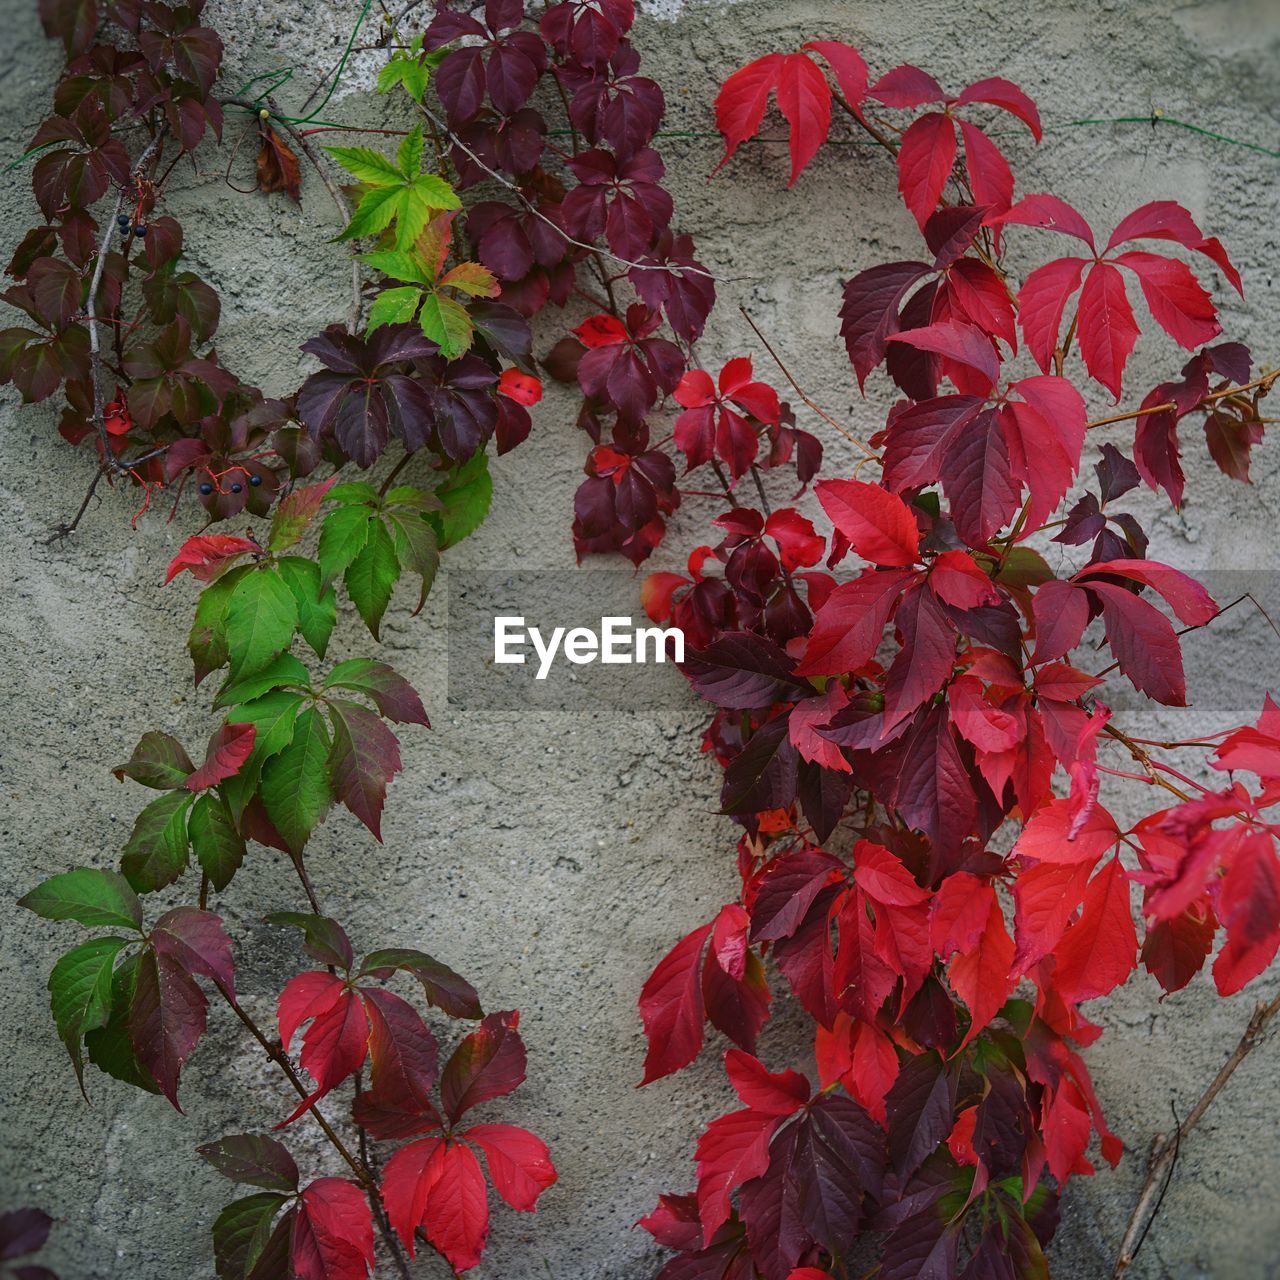 CLOSE-UP OF RED LEAVES ON PLANT